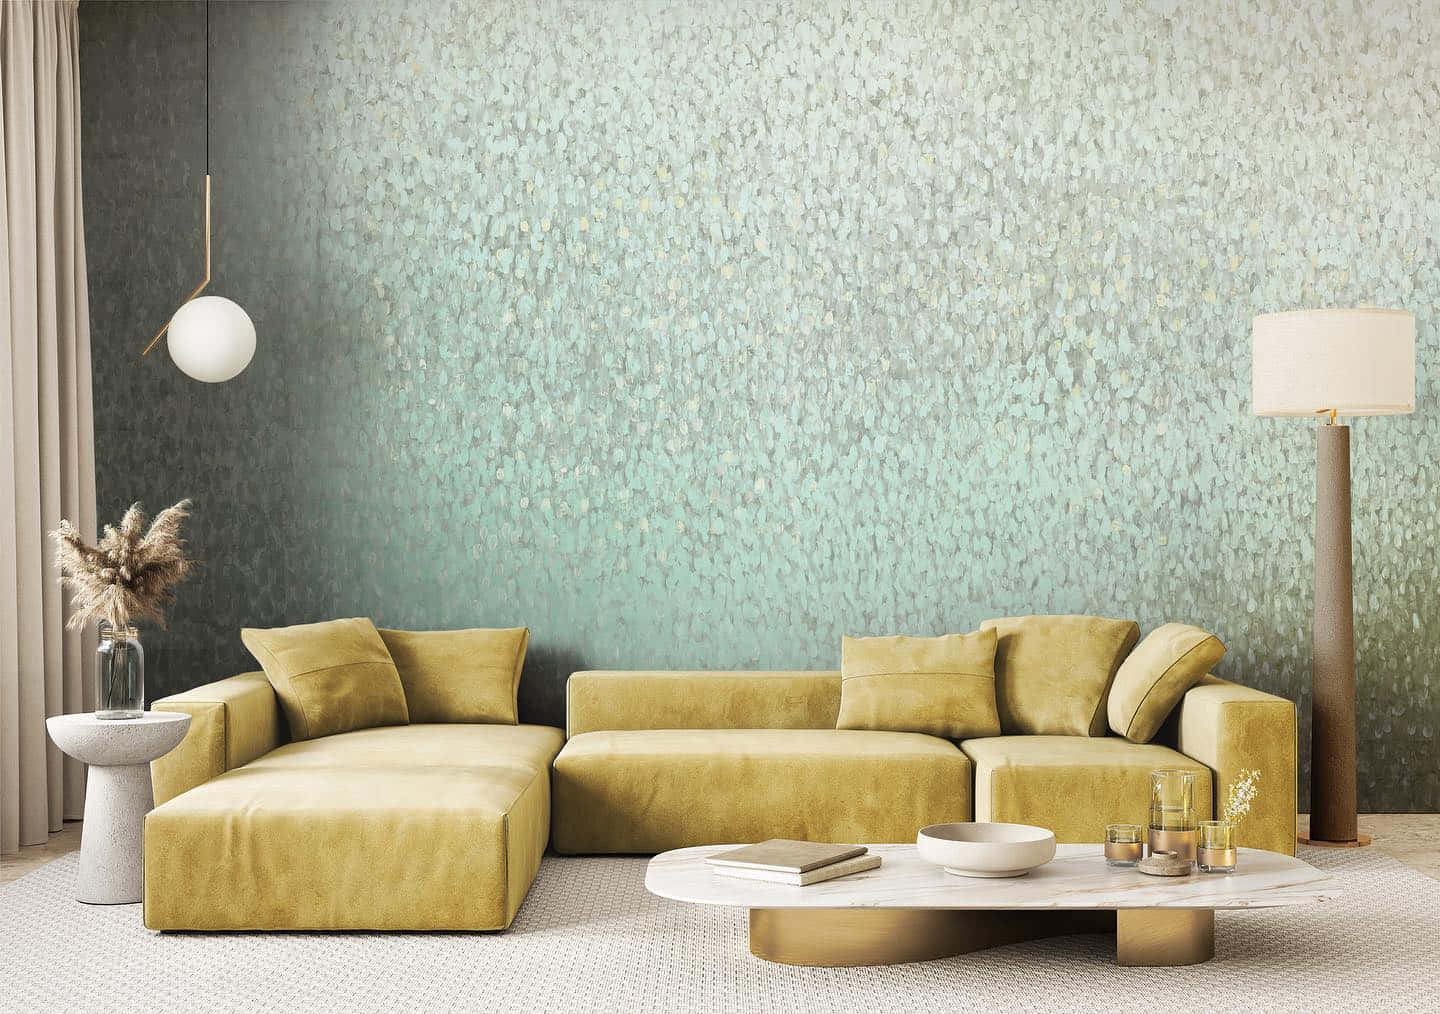 Modern Living Roomwith Velvet Sofaand Textured Wall Background